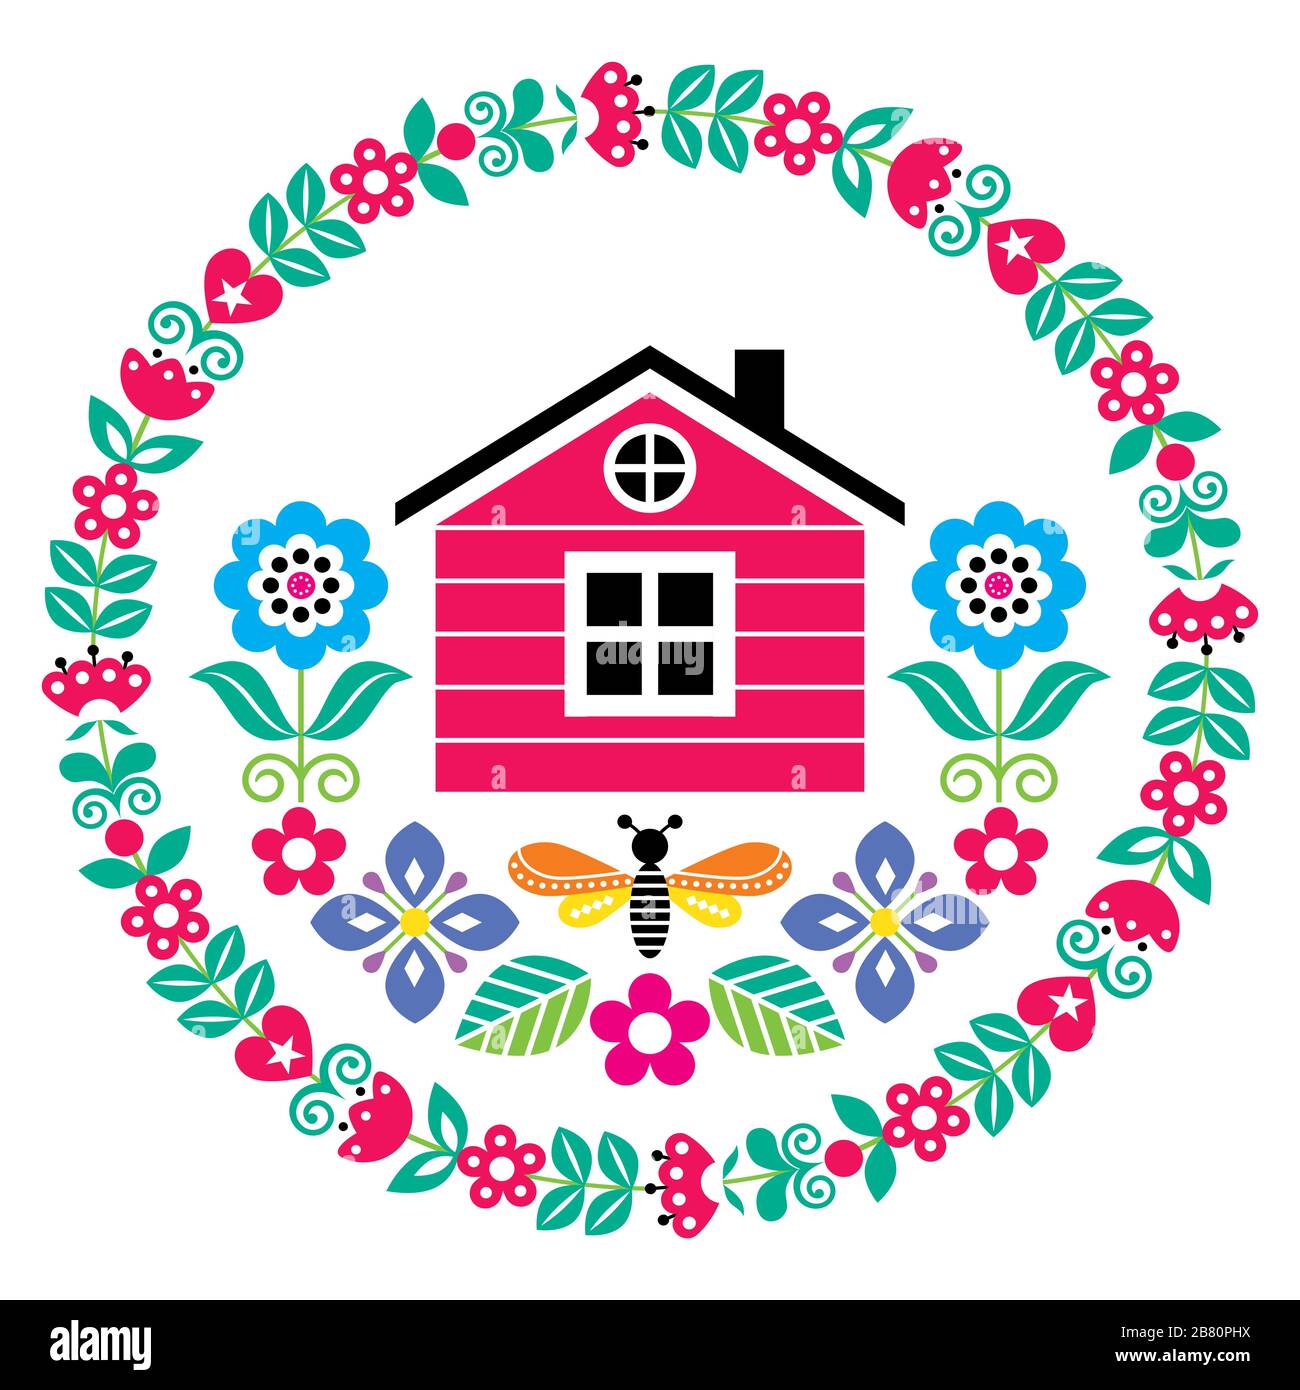 Scandinavian folk art vector cute floral pattern with Finnish or Norwegian house in round frame, greeting card with flowers in red, pink, green, and b Stock Vector